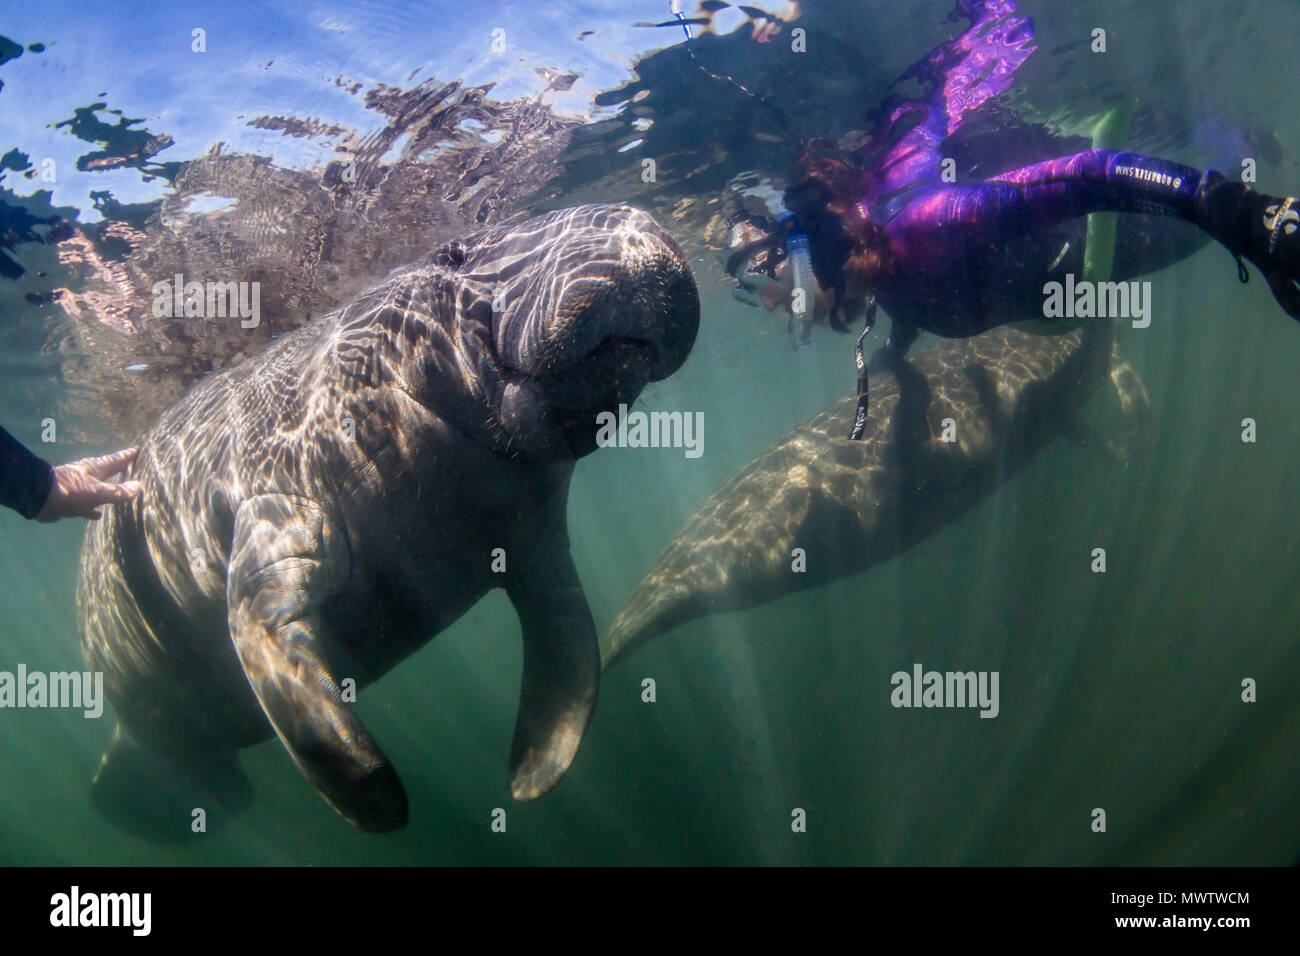 West Indian manatee (Trichechus manatus), underwater with snorkeler, Homosassa Springs, Florida, United States of America, North America Stock Photo